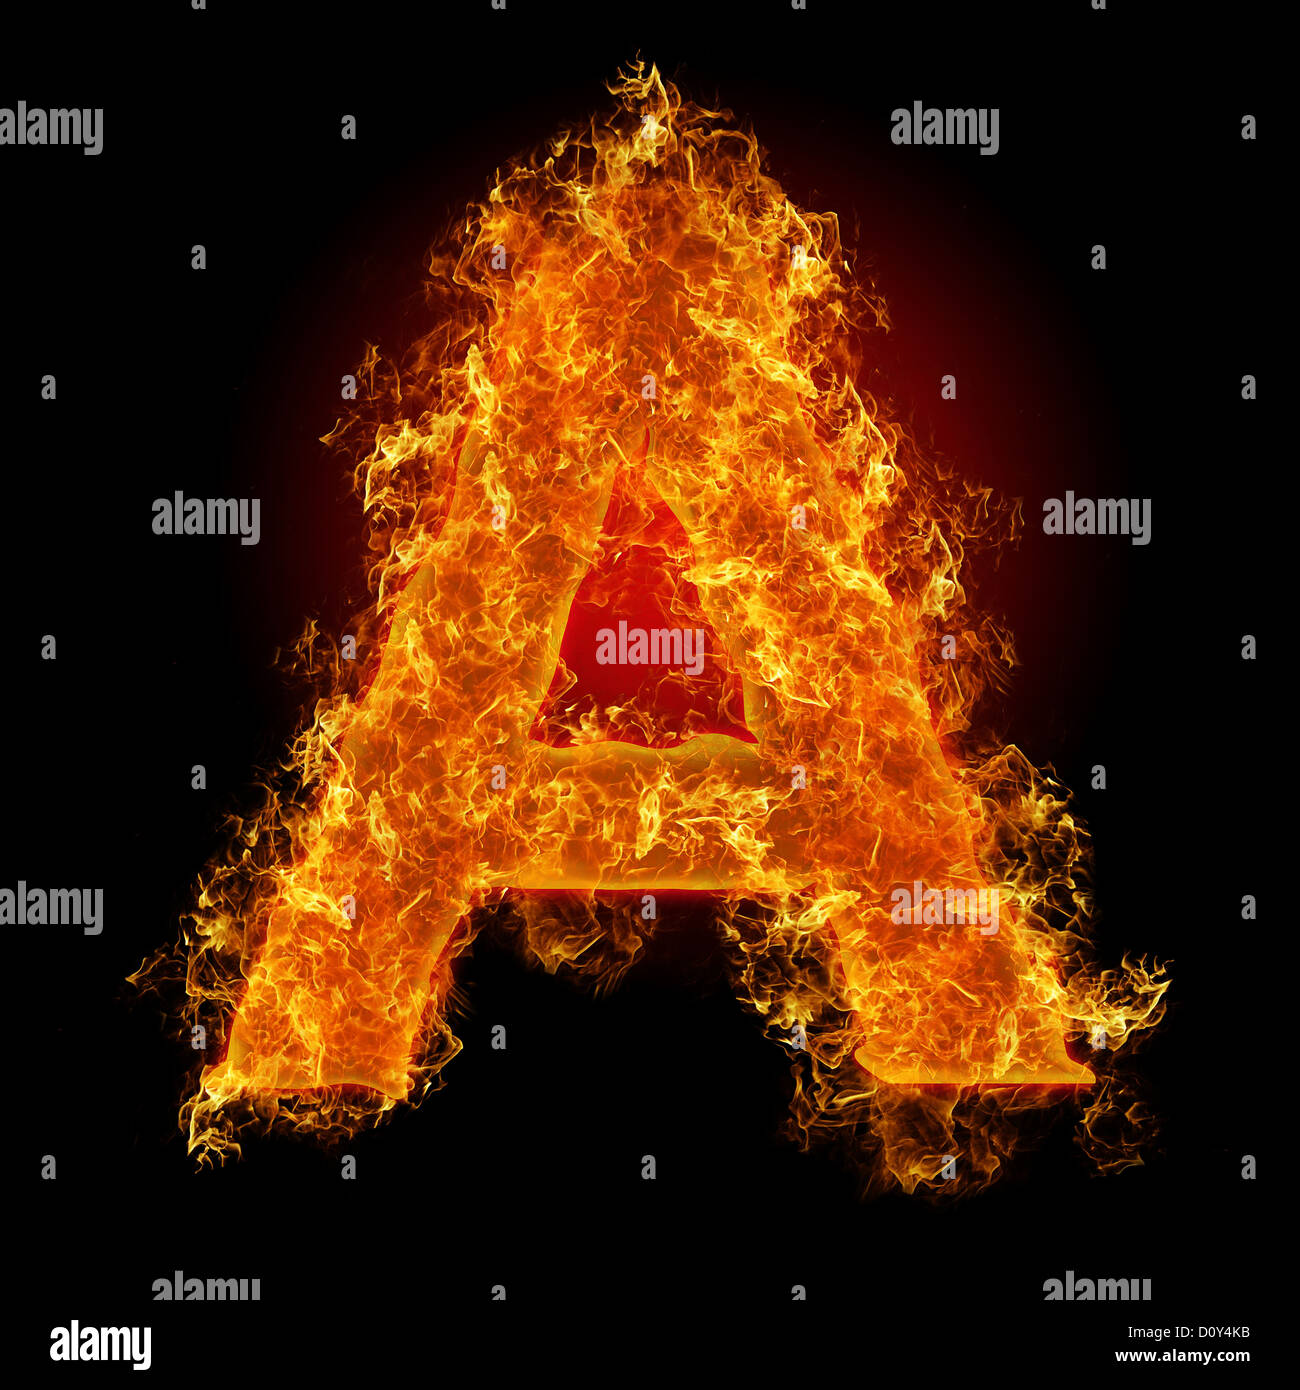 Fire letter A Stock Photo - Alamy